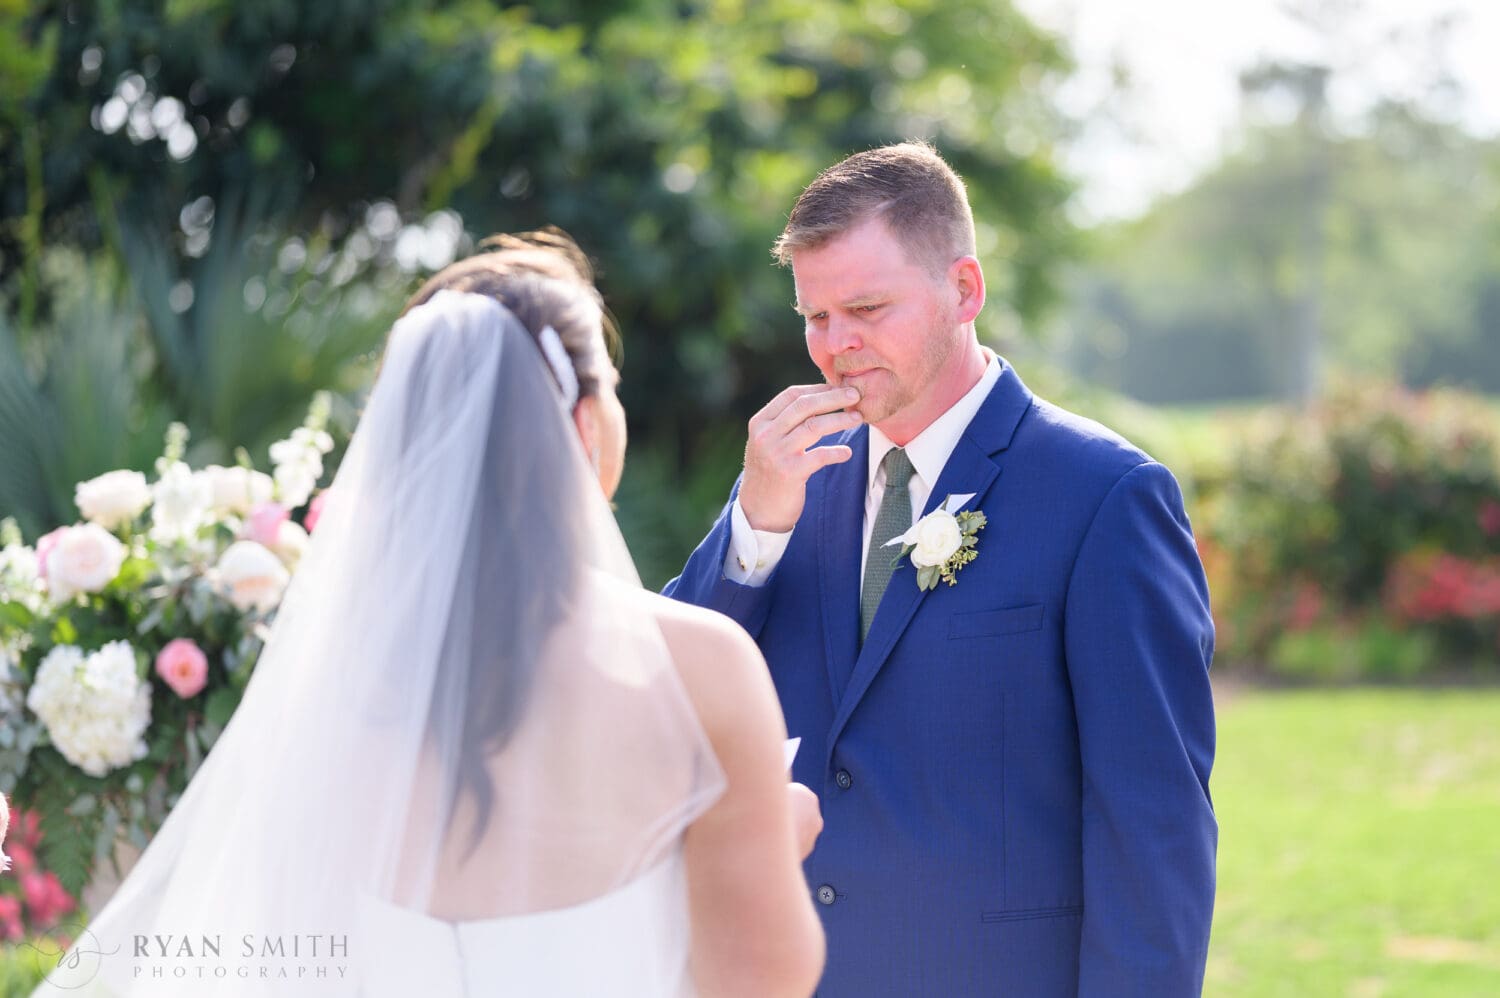 Emotional groom during the vows - Pine Lakes Country Club